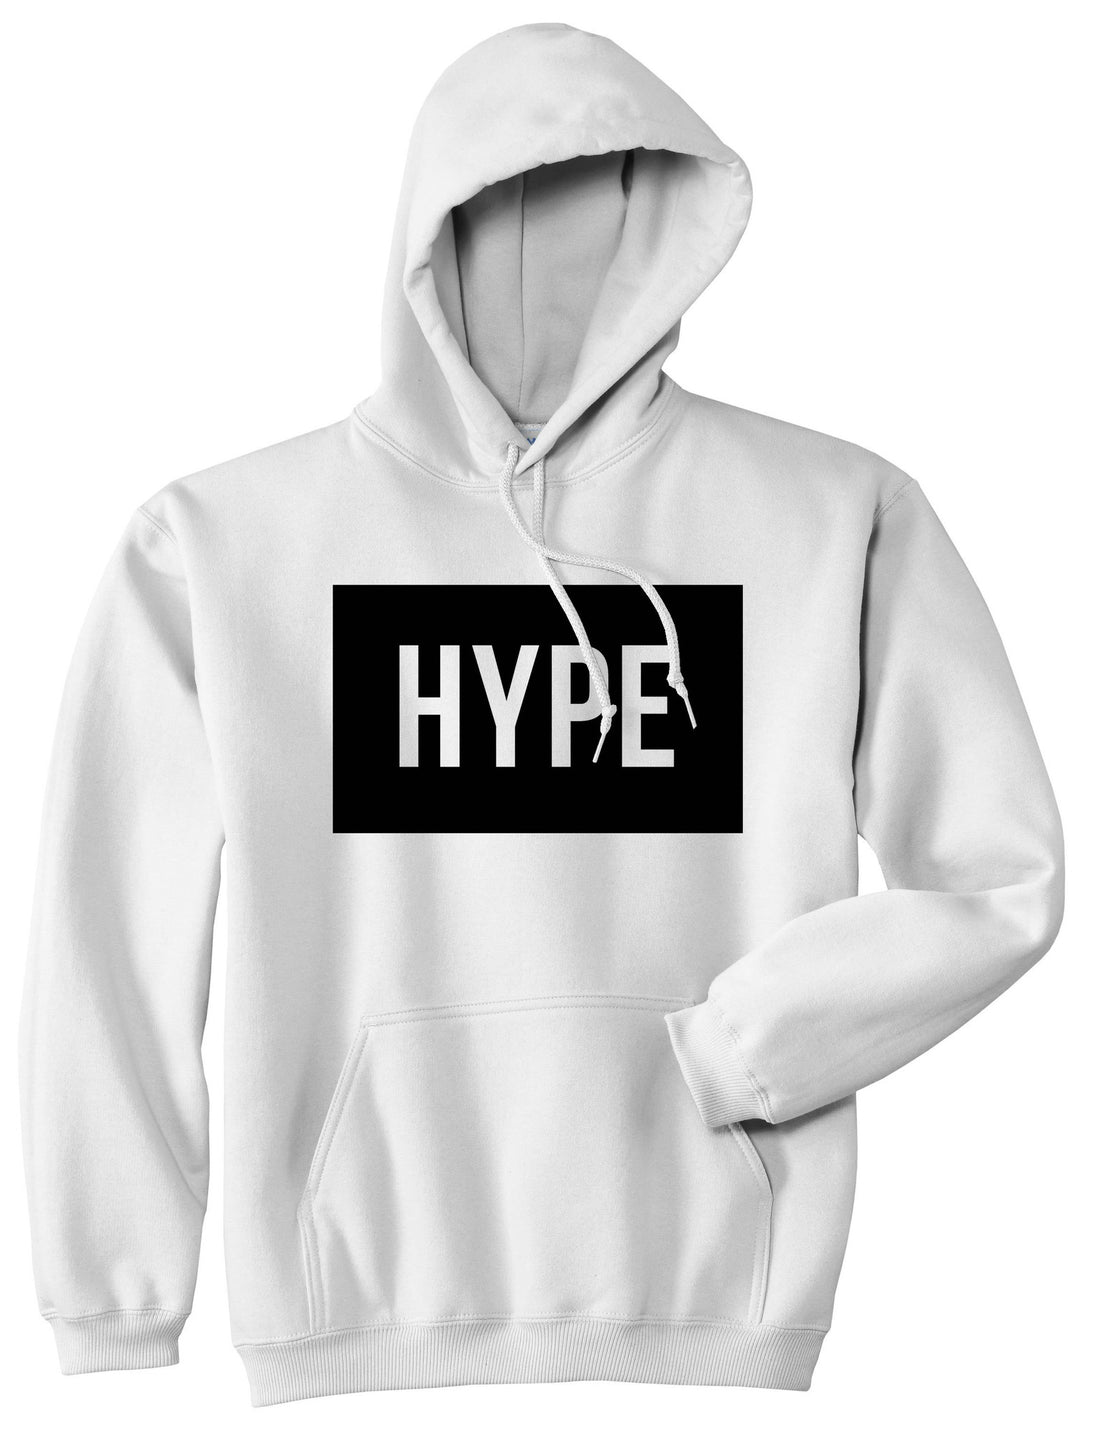 Hype Style Streetwear Brand Logo White by Kings Of NY Pullover Hoodie Hoody in White by Kings Of NY